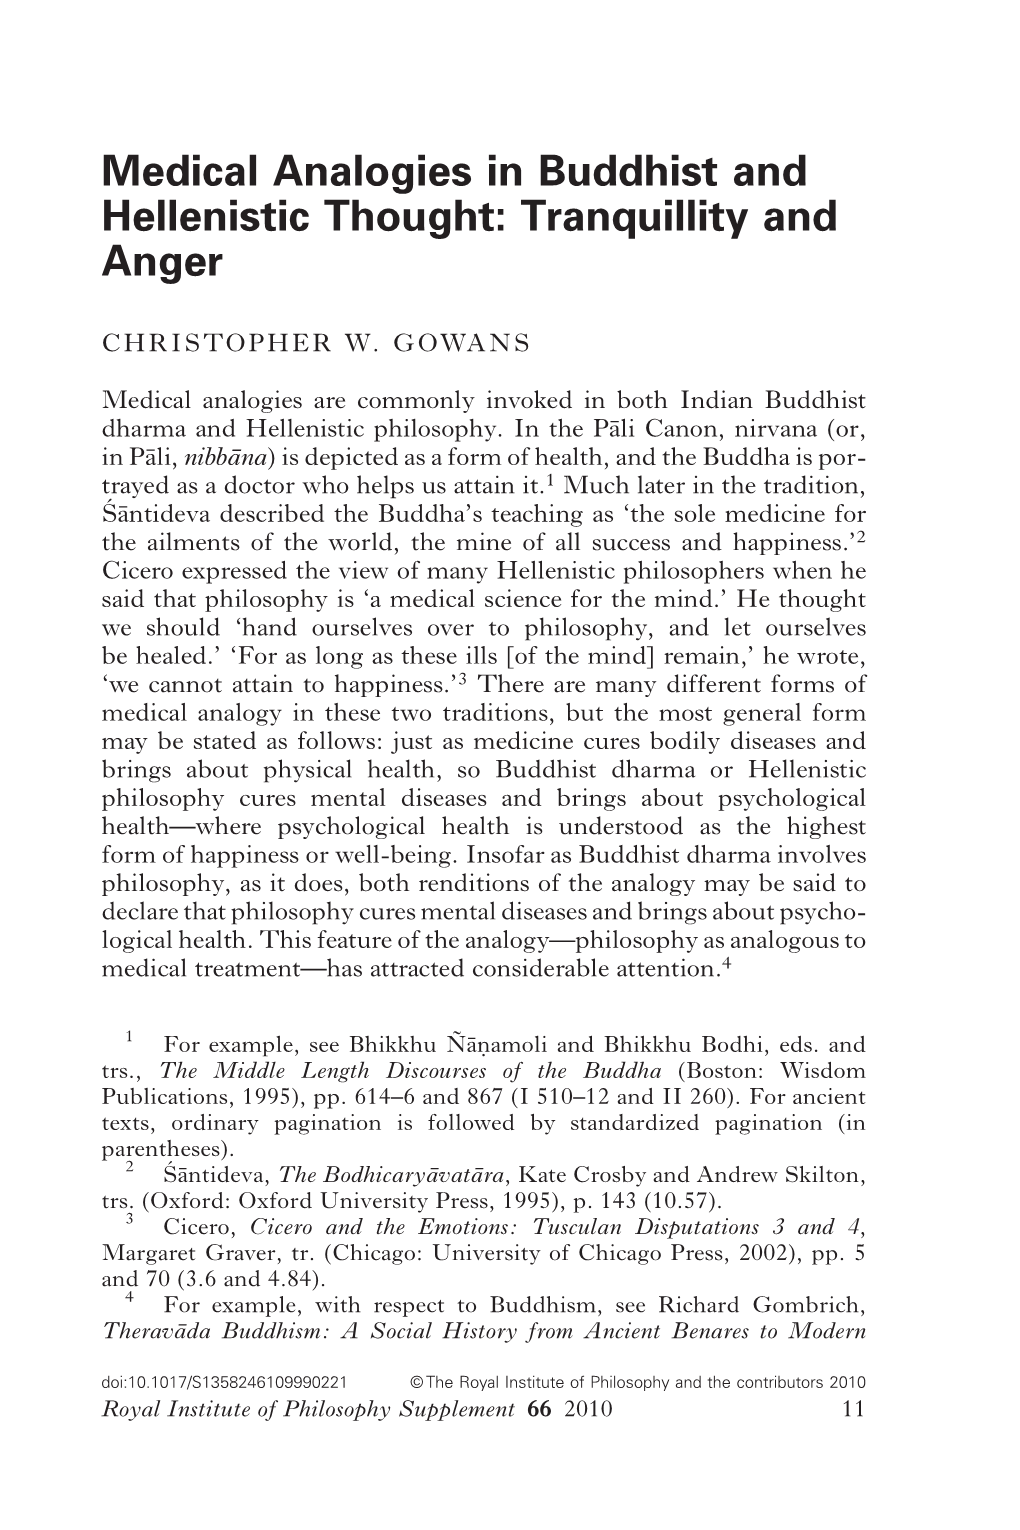 Medical Analogies in Buddhist and Hellenistic Thought: Tranquillity and Anger